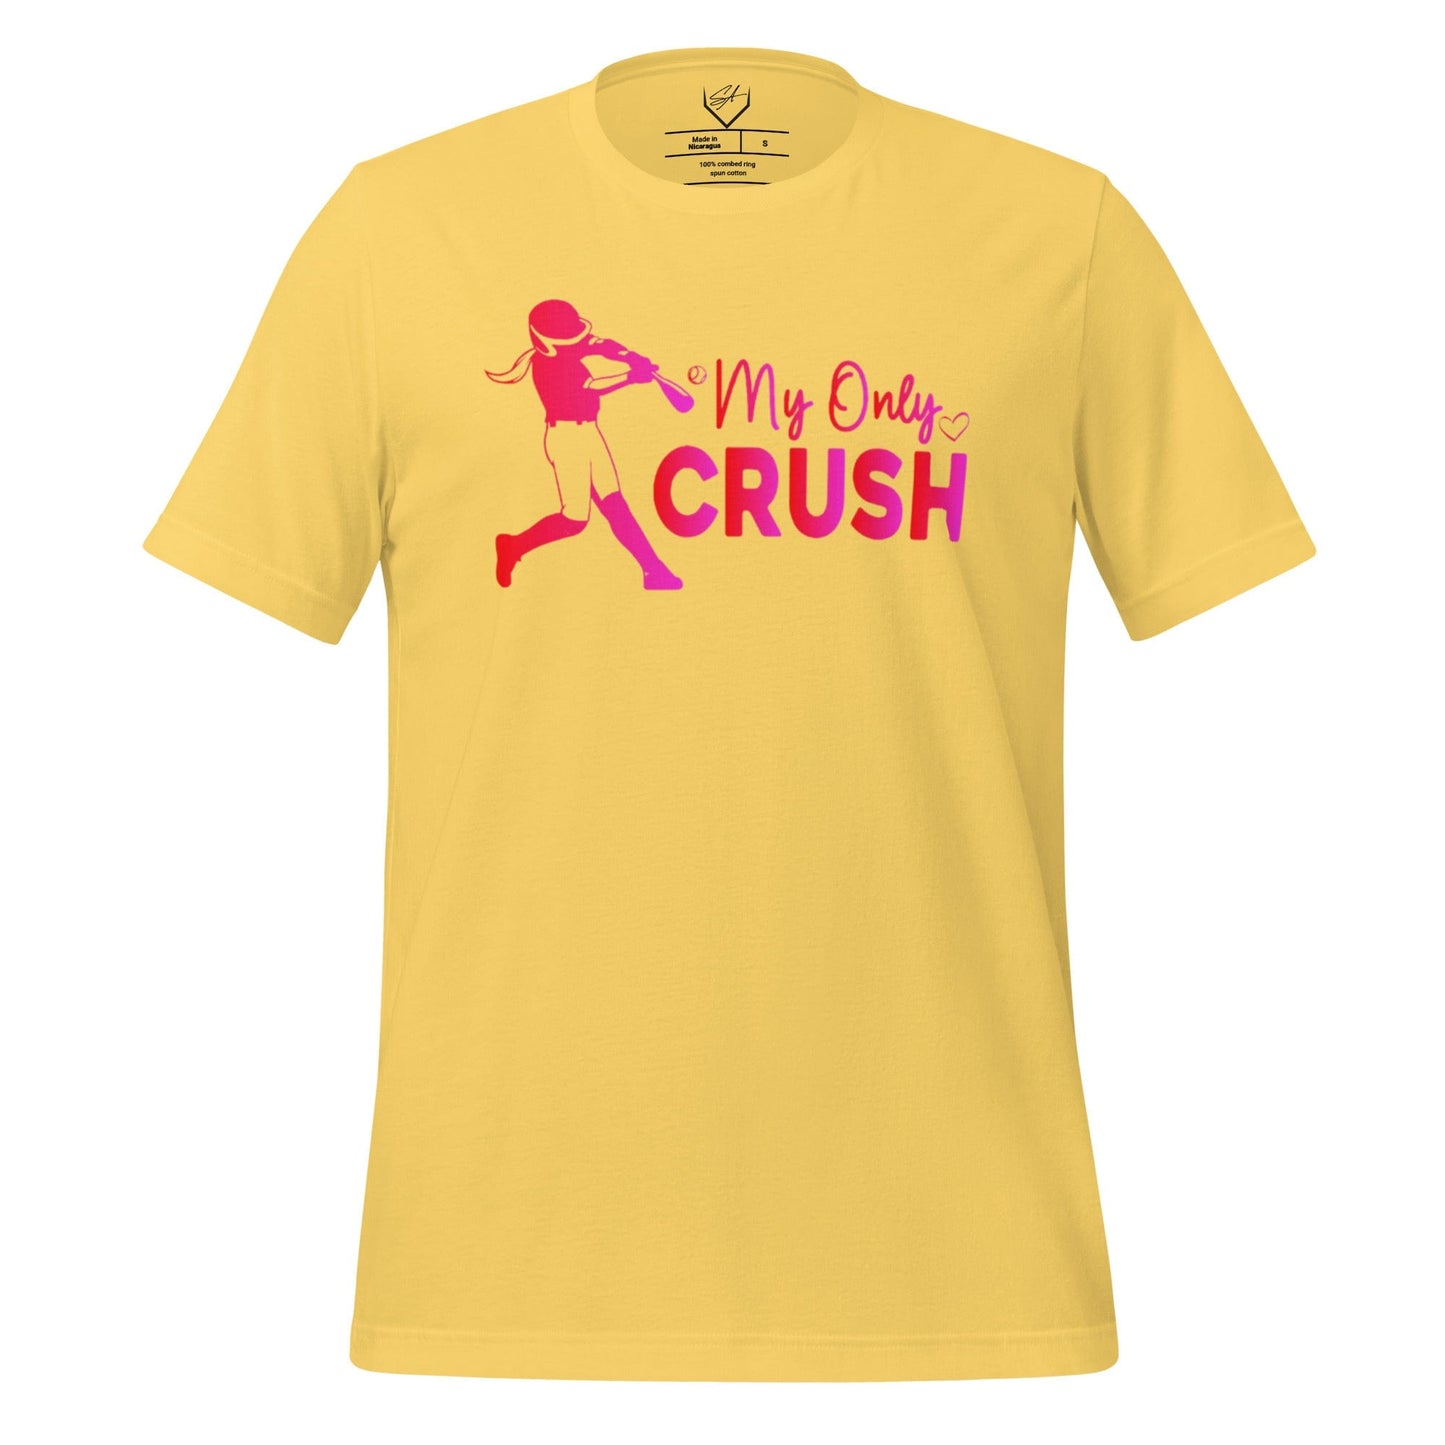 My Only Crush - Adult Tee